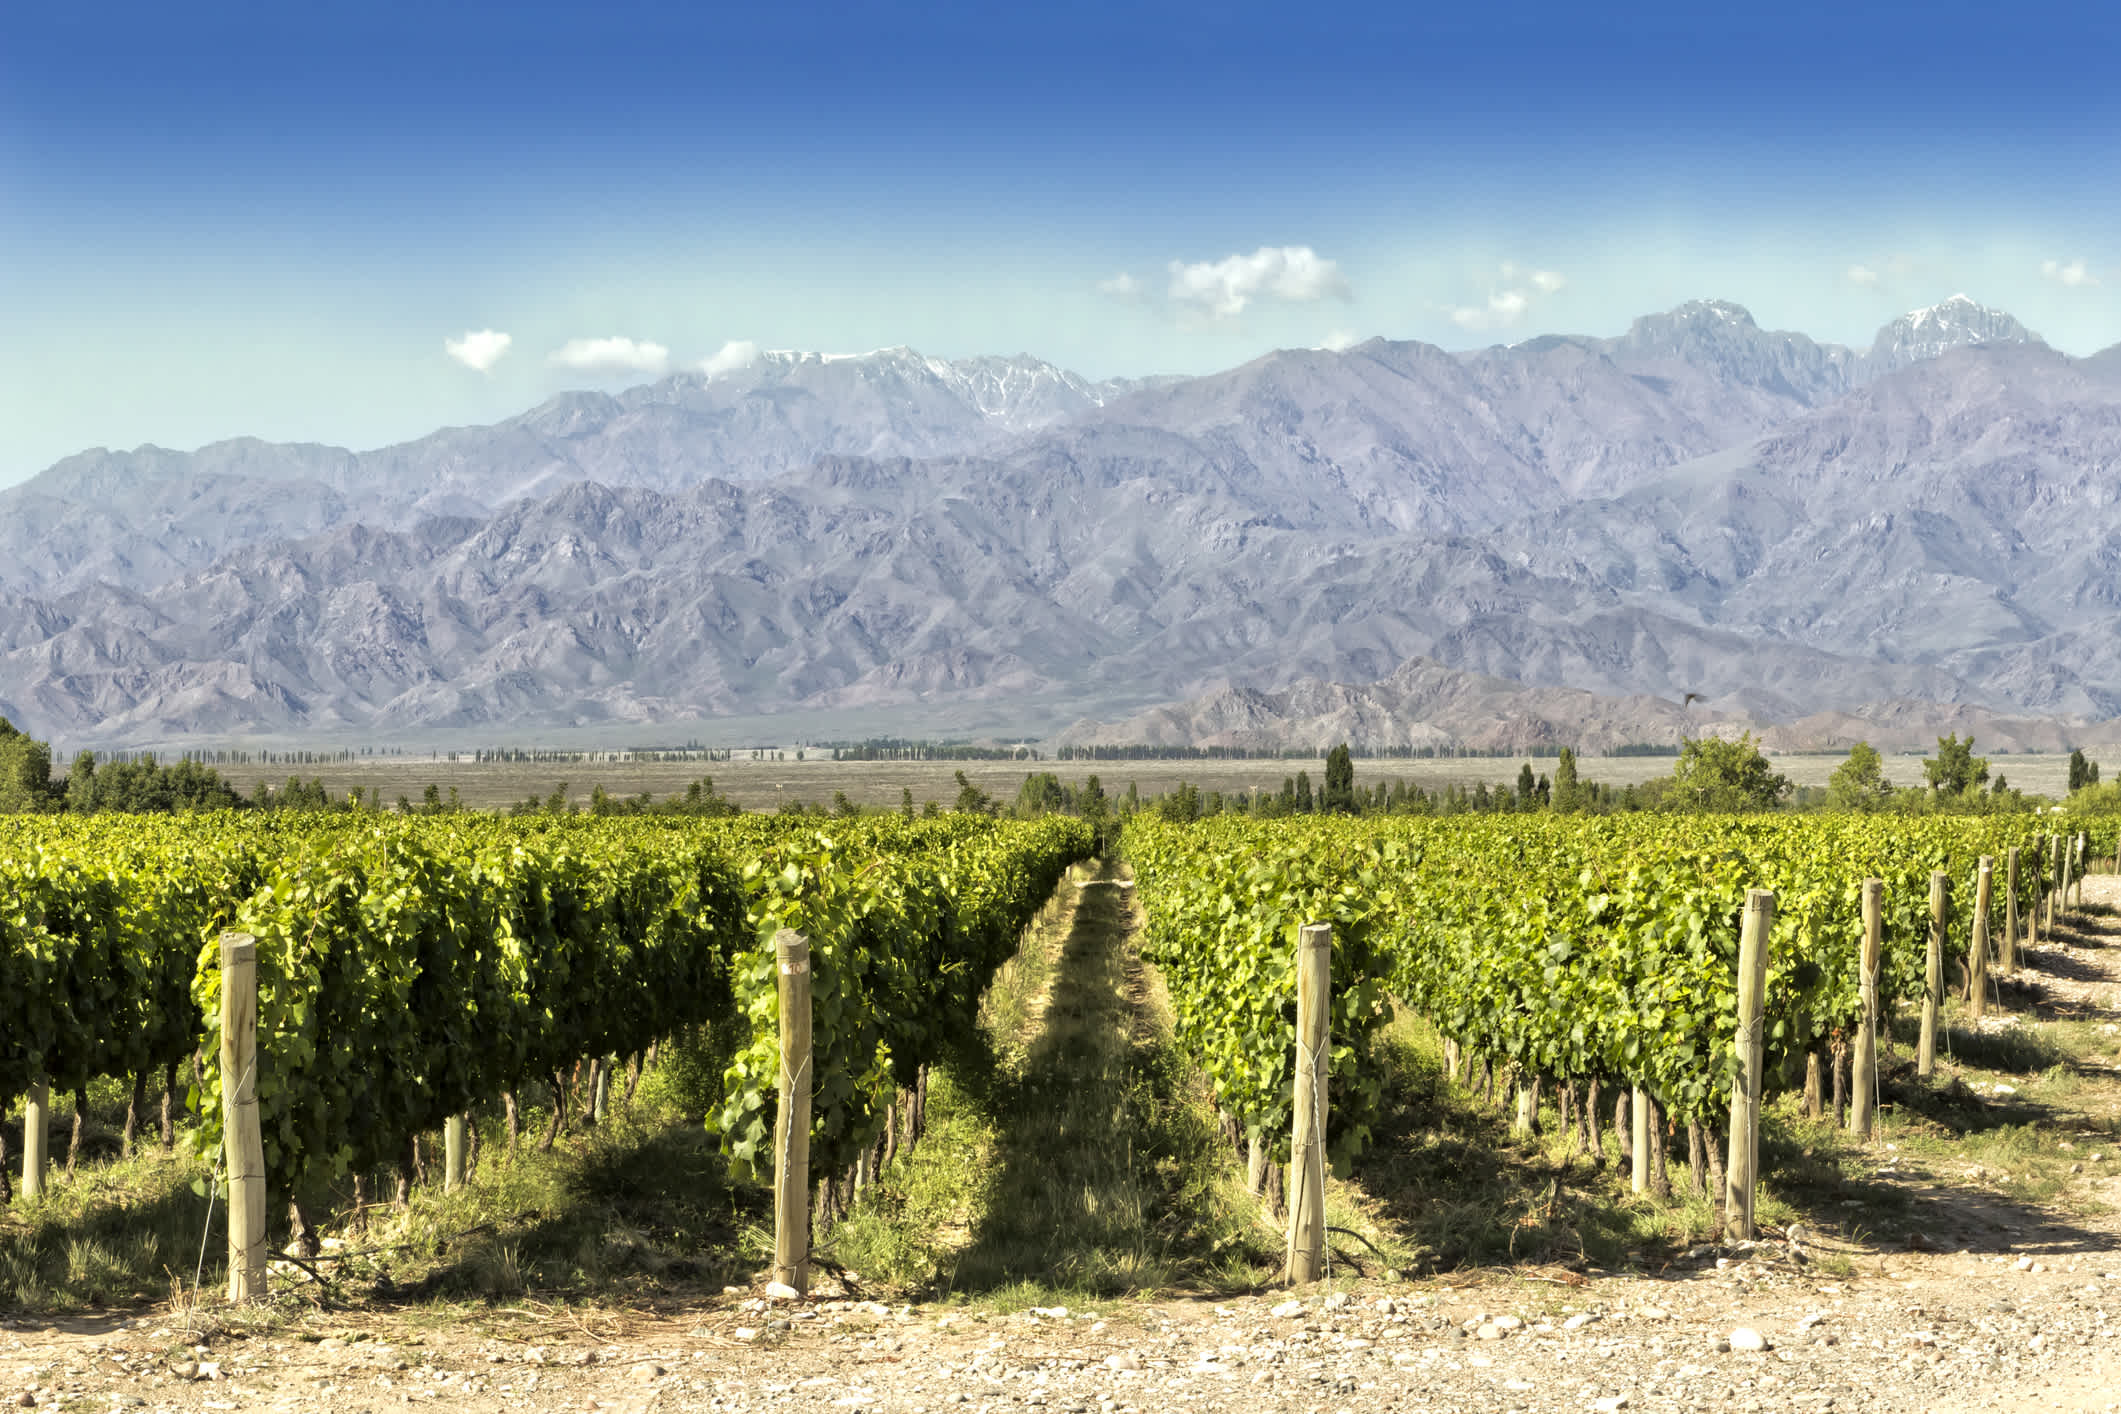 Discover the beautiful wine country of Argentina on a Mendoza wine tour 